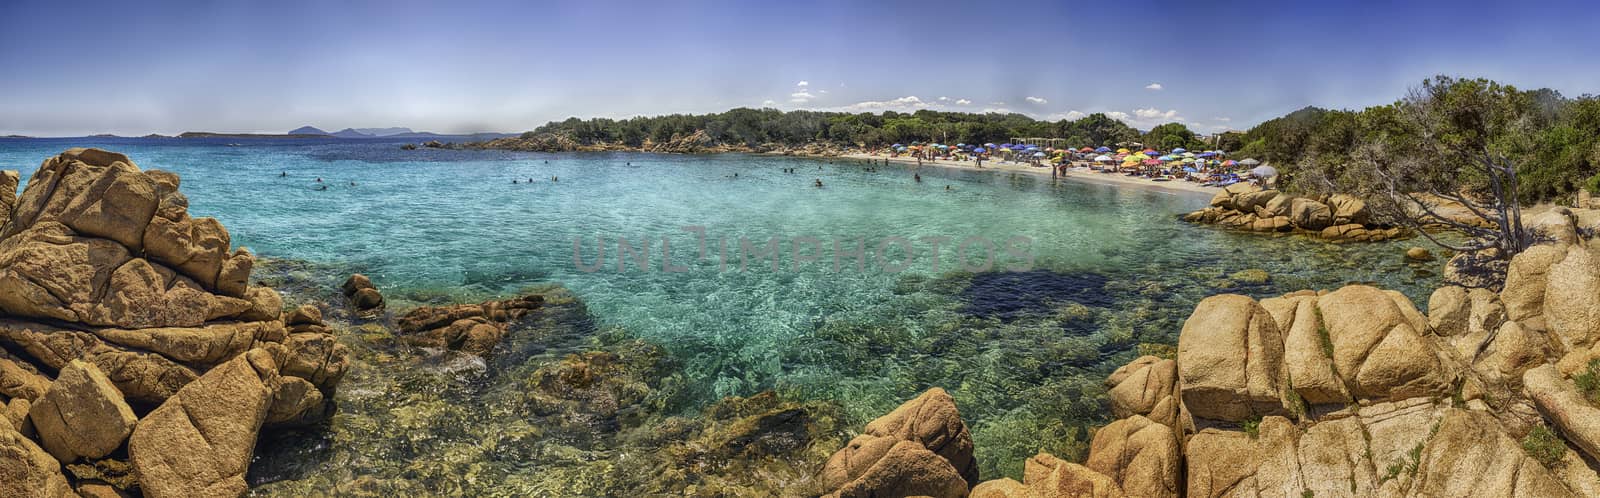 Panoramic view over the enchanting beach of Capriccioli, one of the most beautiful seaside places in Costa Smeralda, northern Sardinia, Italy